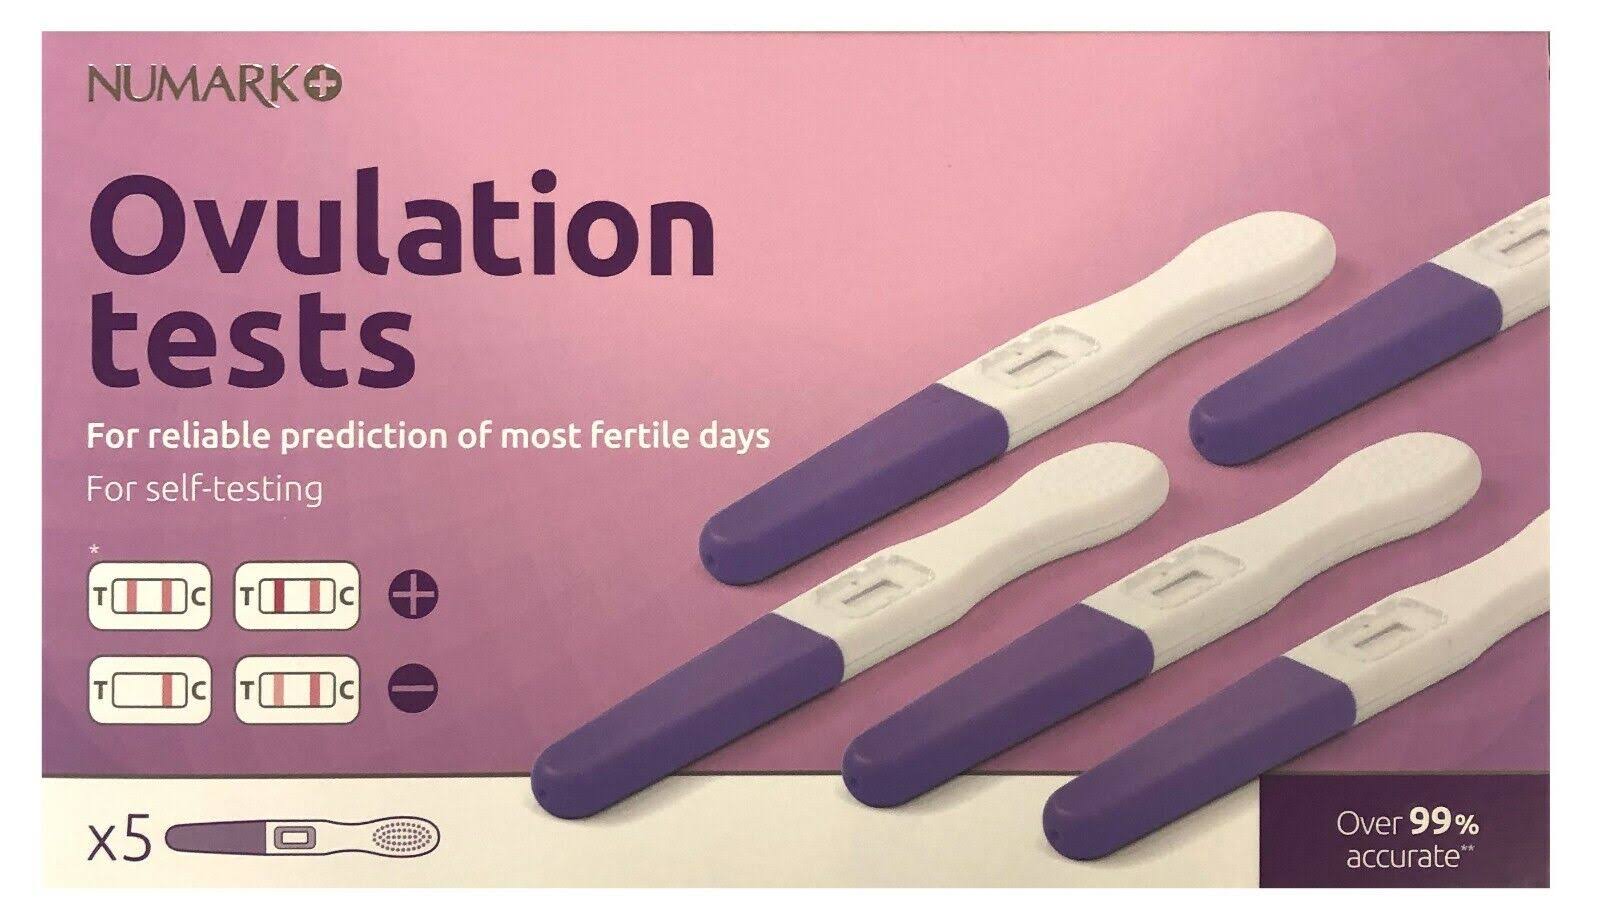 Numark Ovulation Test Kit For Reliable Prediction of Most Fertile Days